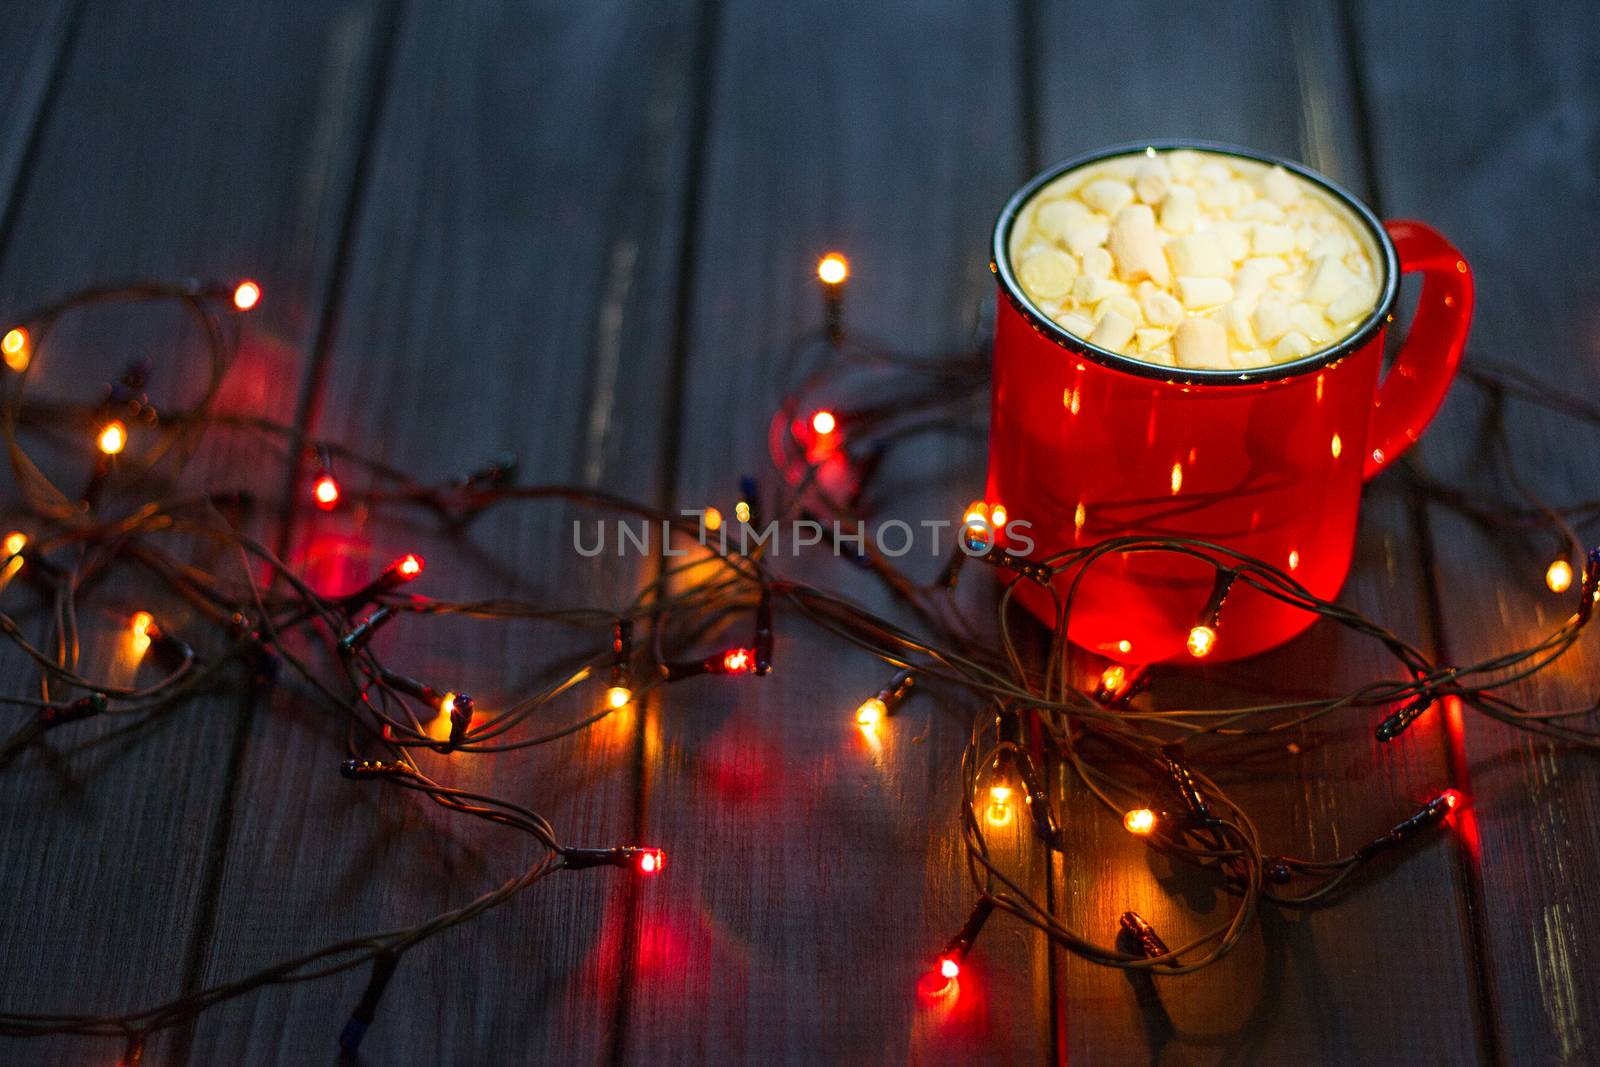 Decorative garland. Christmas lights on dark background and cup.